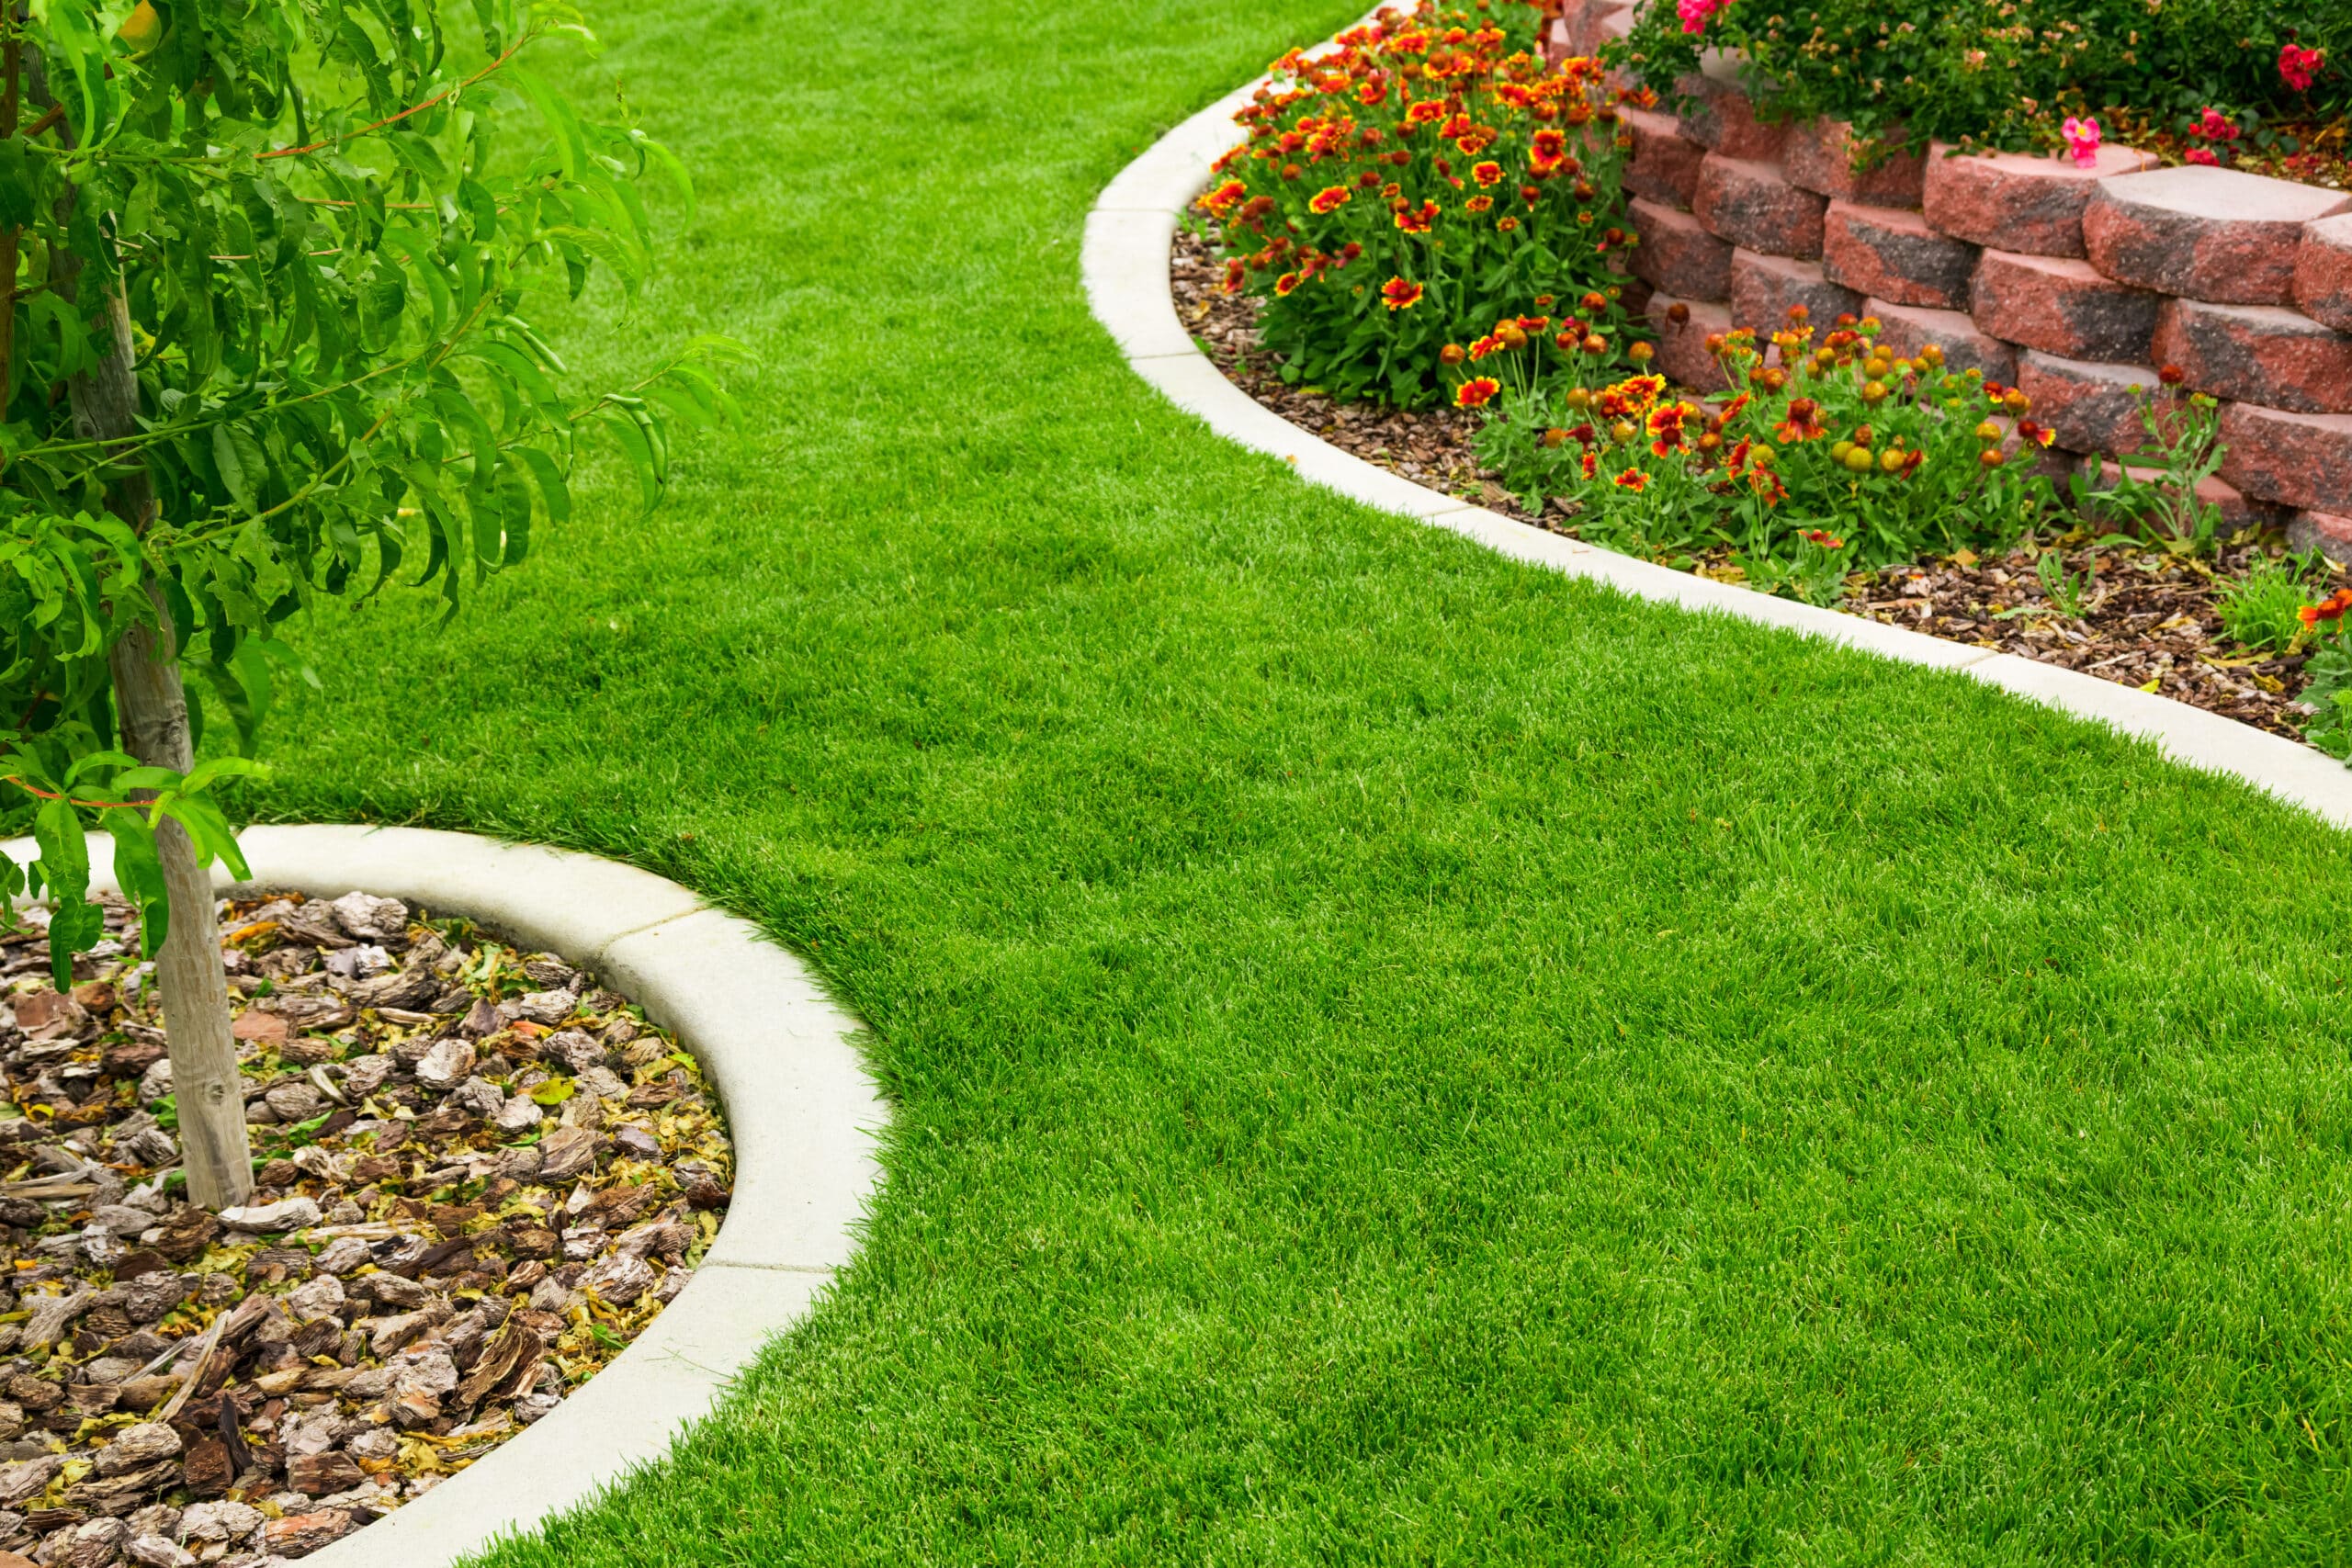 sod installation ads aesthetic appeal to your Colleyville, TX, home